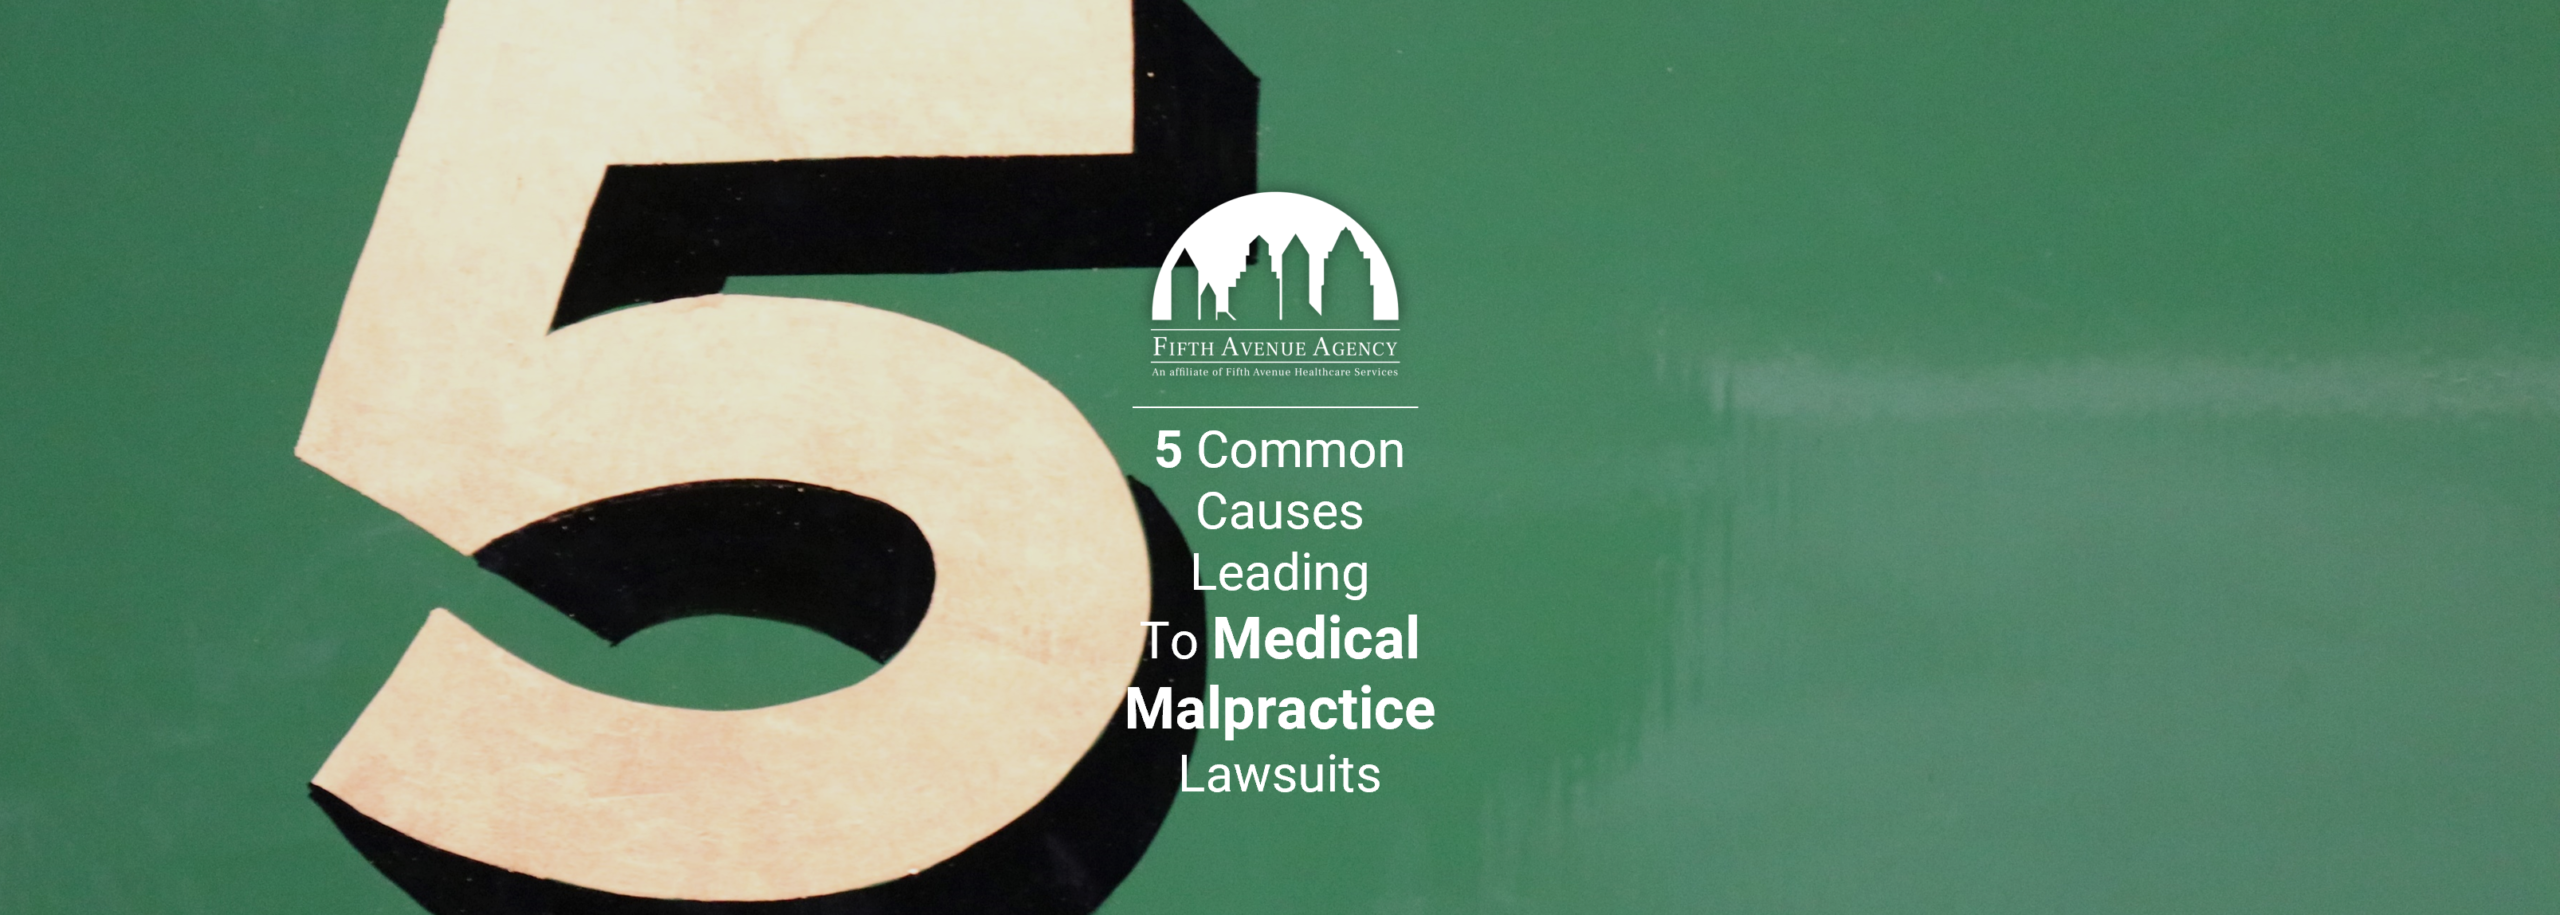 Fifth Avenue Agency 5 Common Causes Leading To Medical Malpractice Lawsuits